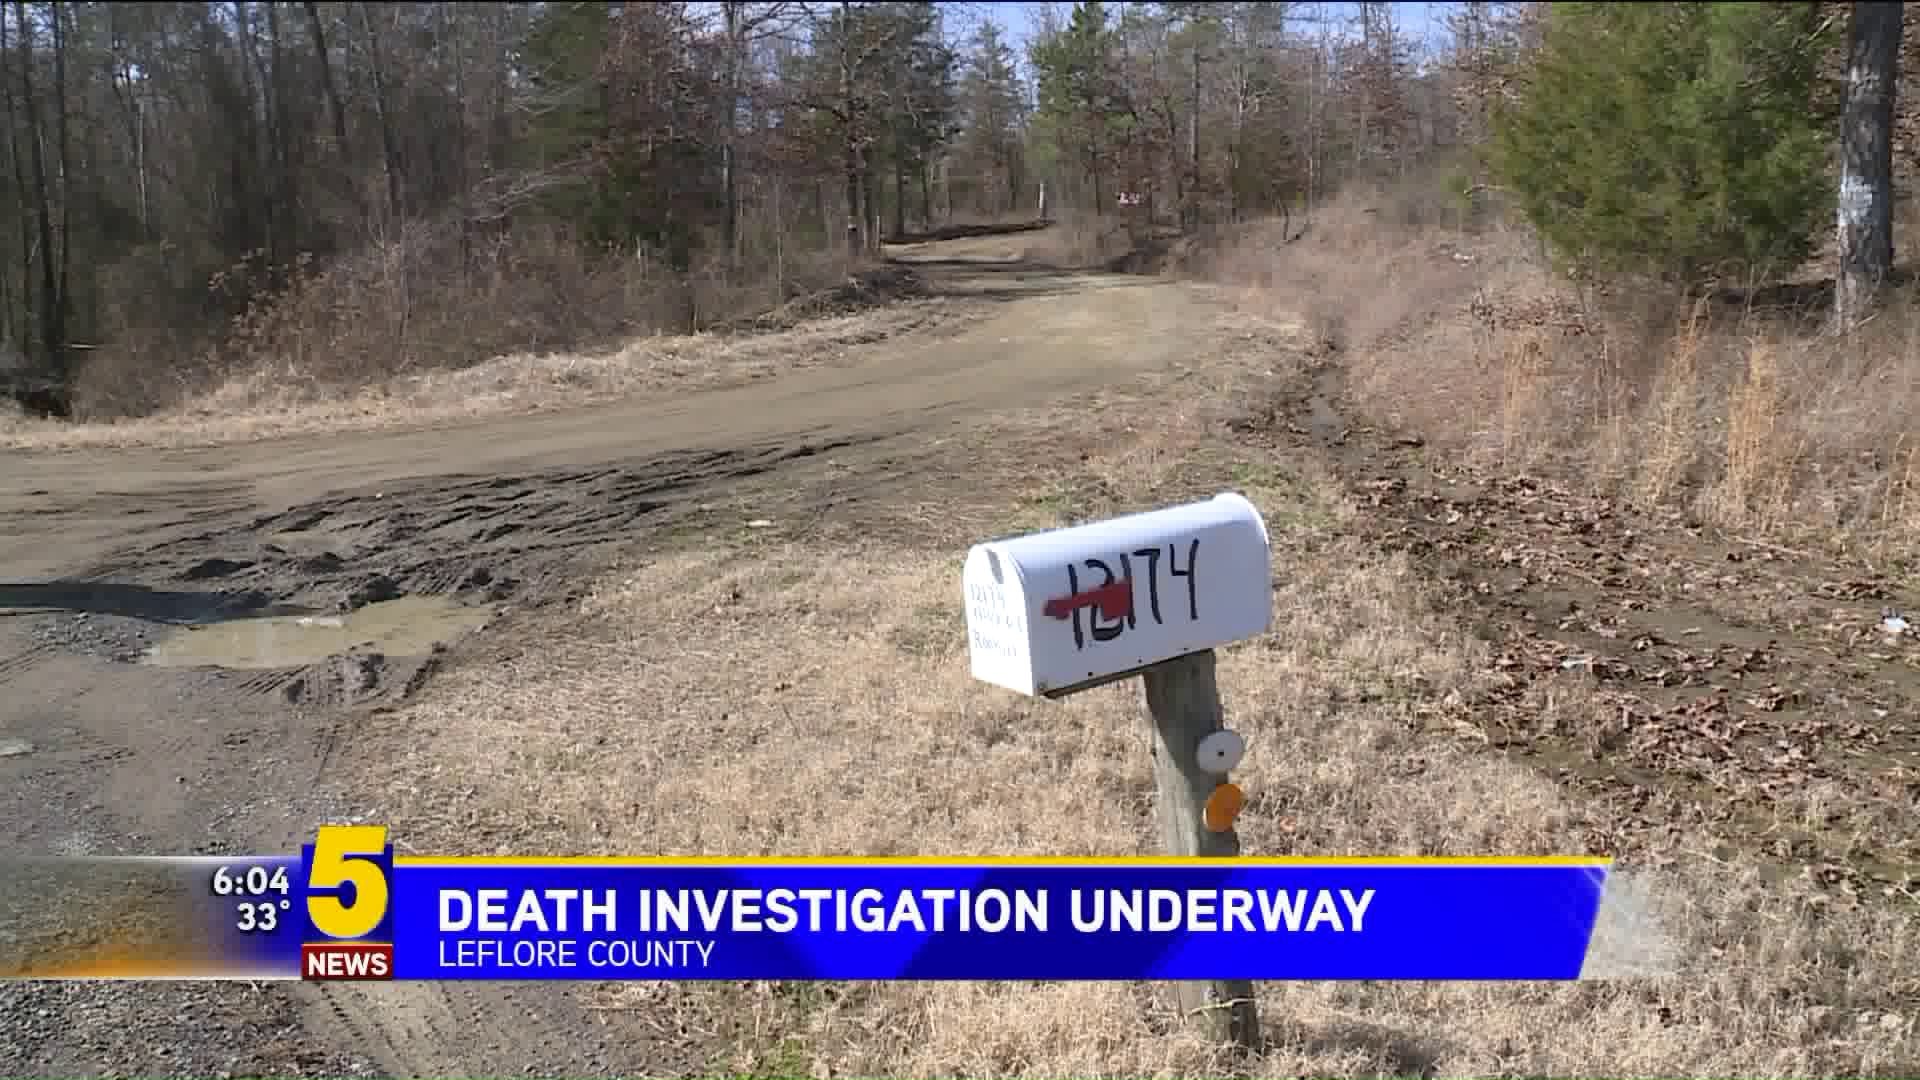 Officers Find Body While Responding to Domestic Assault Call in LeFlore County